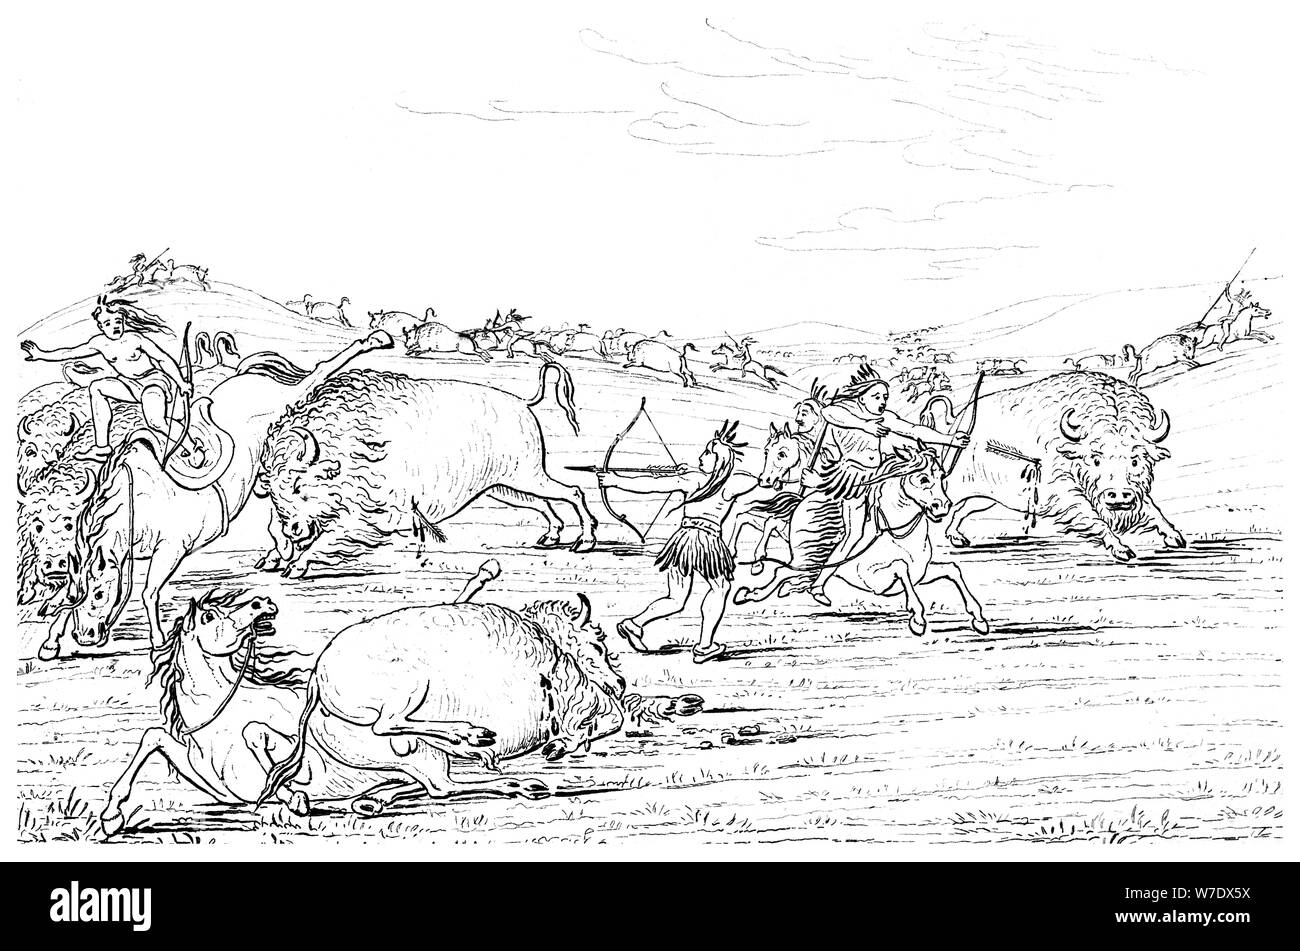 Native Americans hunting buffalo, 1841.Artist: Myers and Co Stock Photo